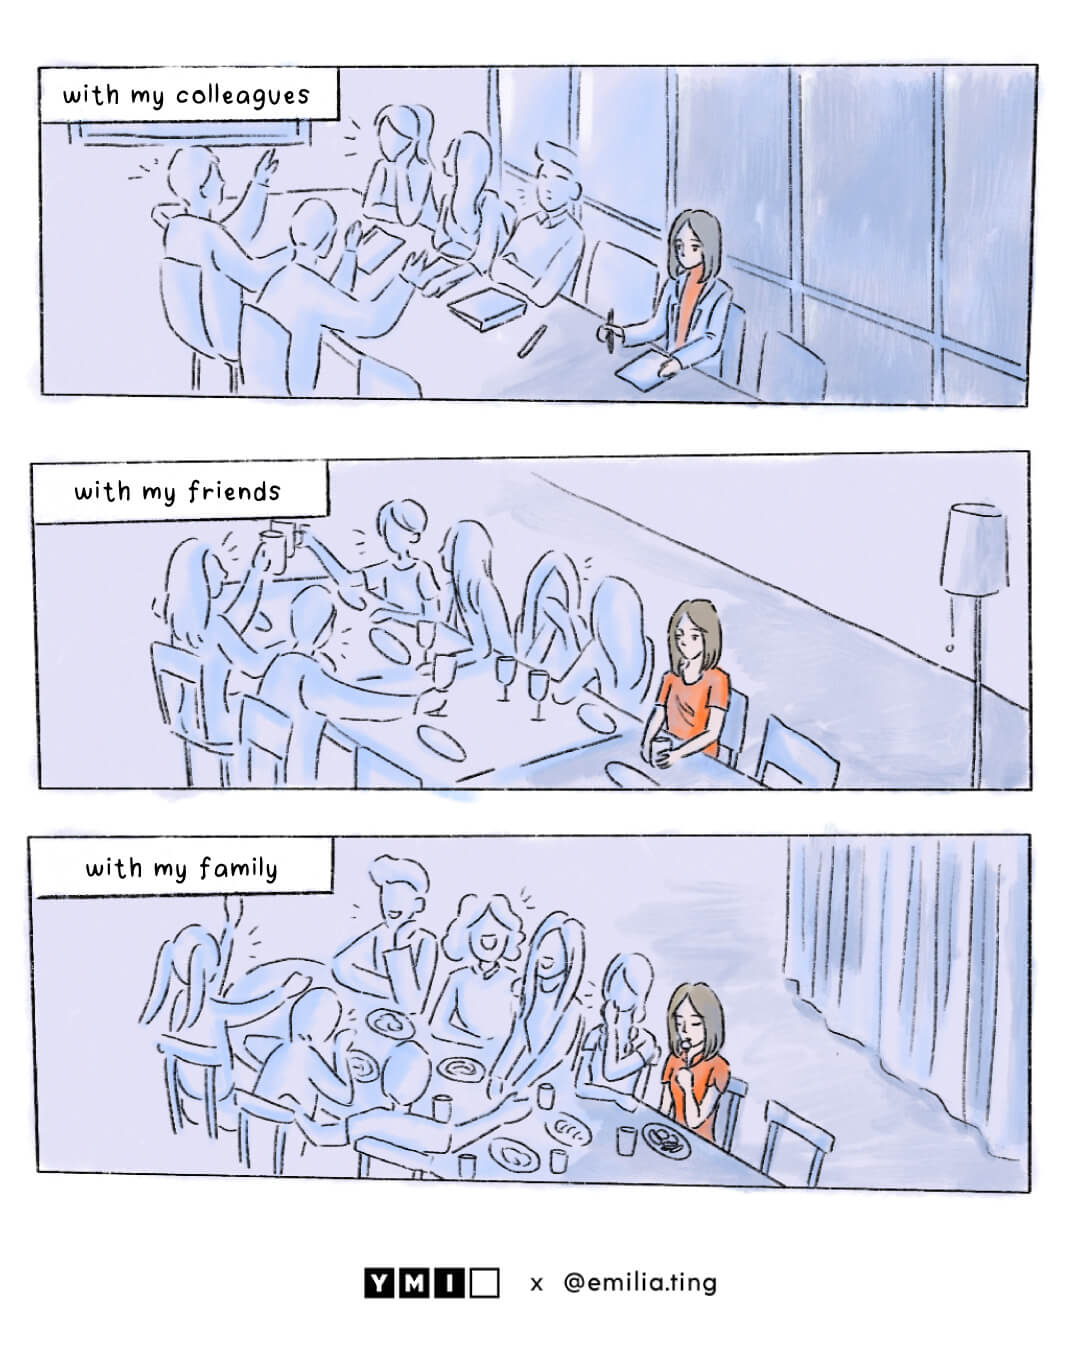 Three panels of comic about a woman is always feeling isolated even with her colleagues, friends and family.